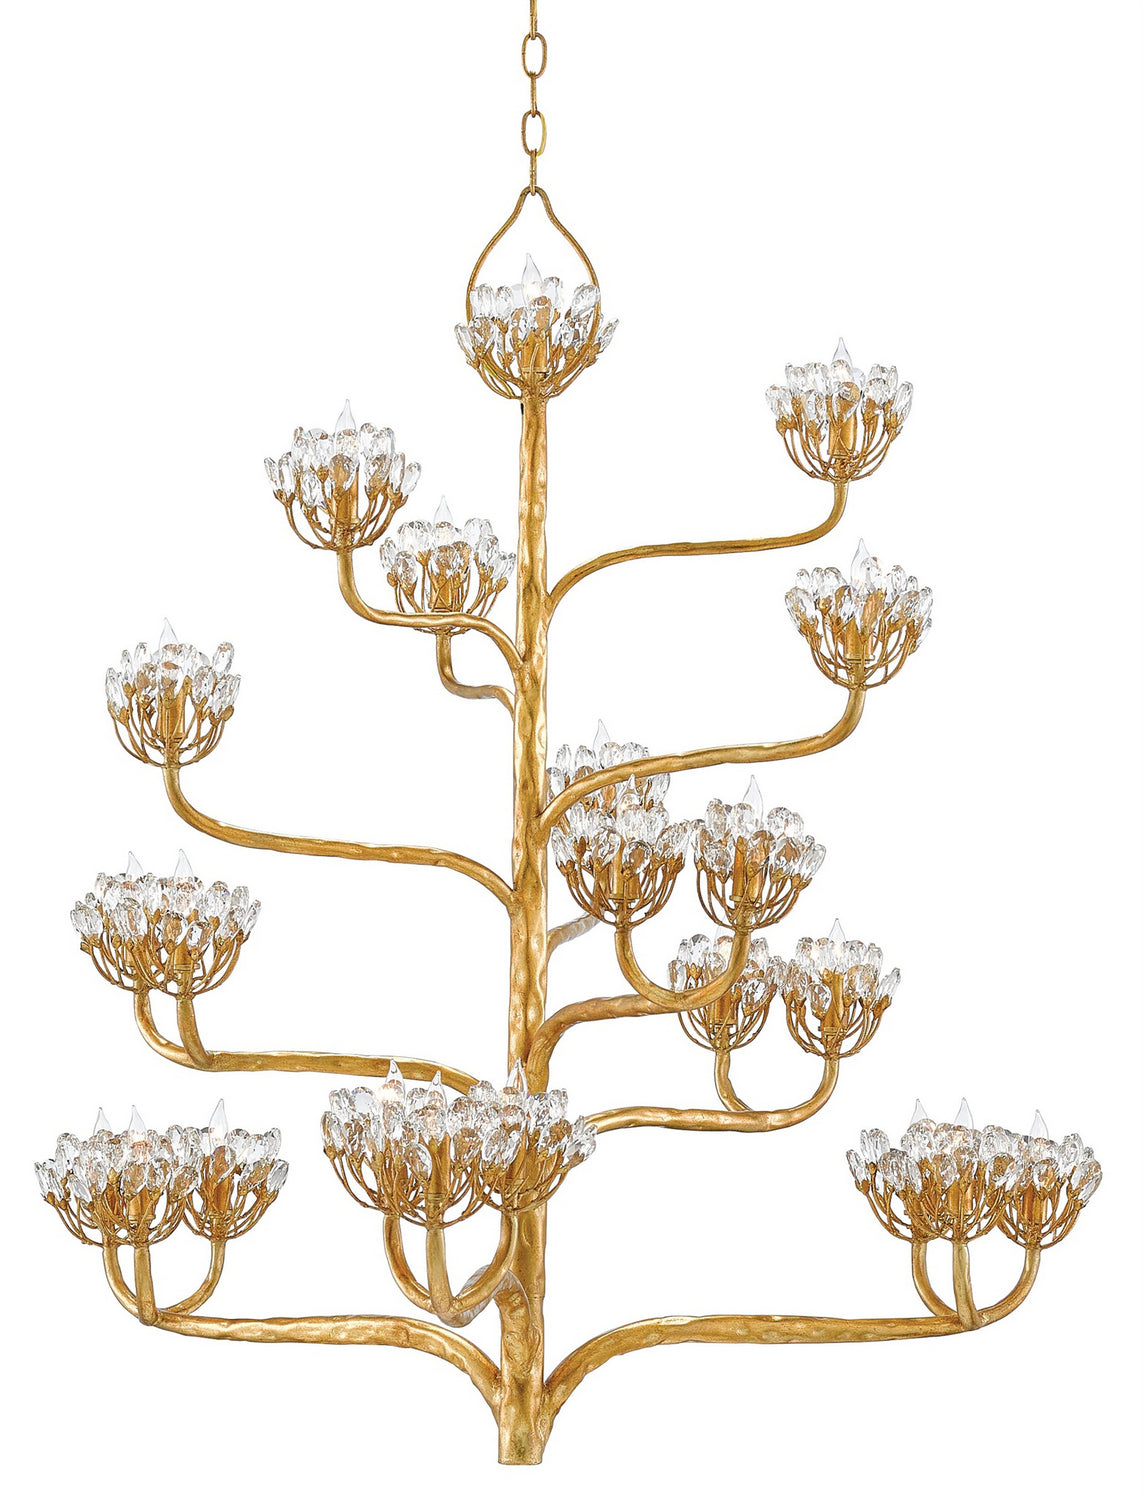 22 Light Chandelier from the Marjorie Skouras collection in Dark Contemporary Gold Leaf finish